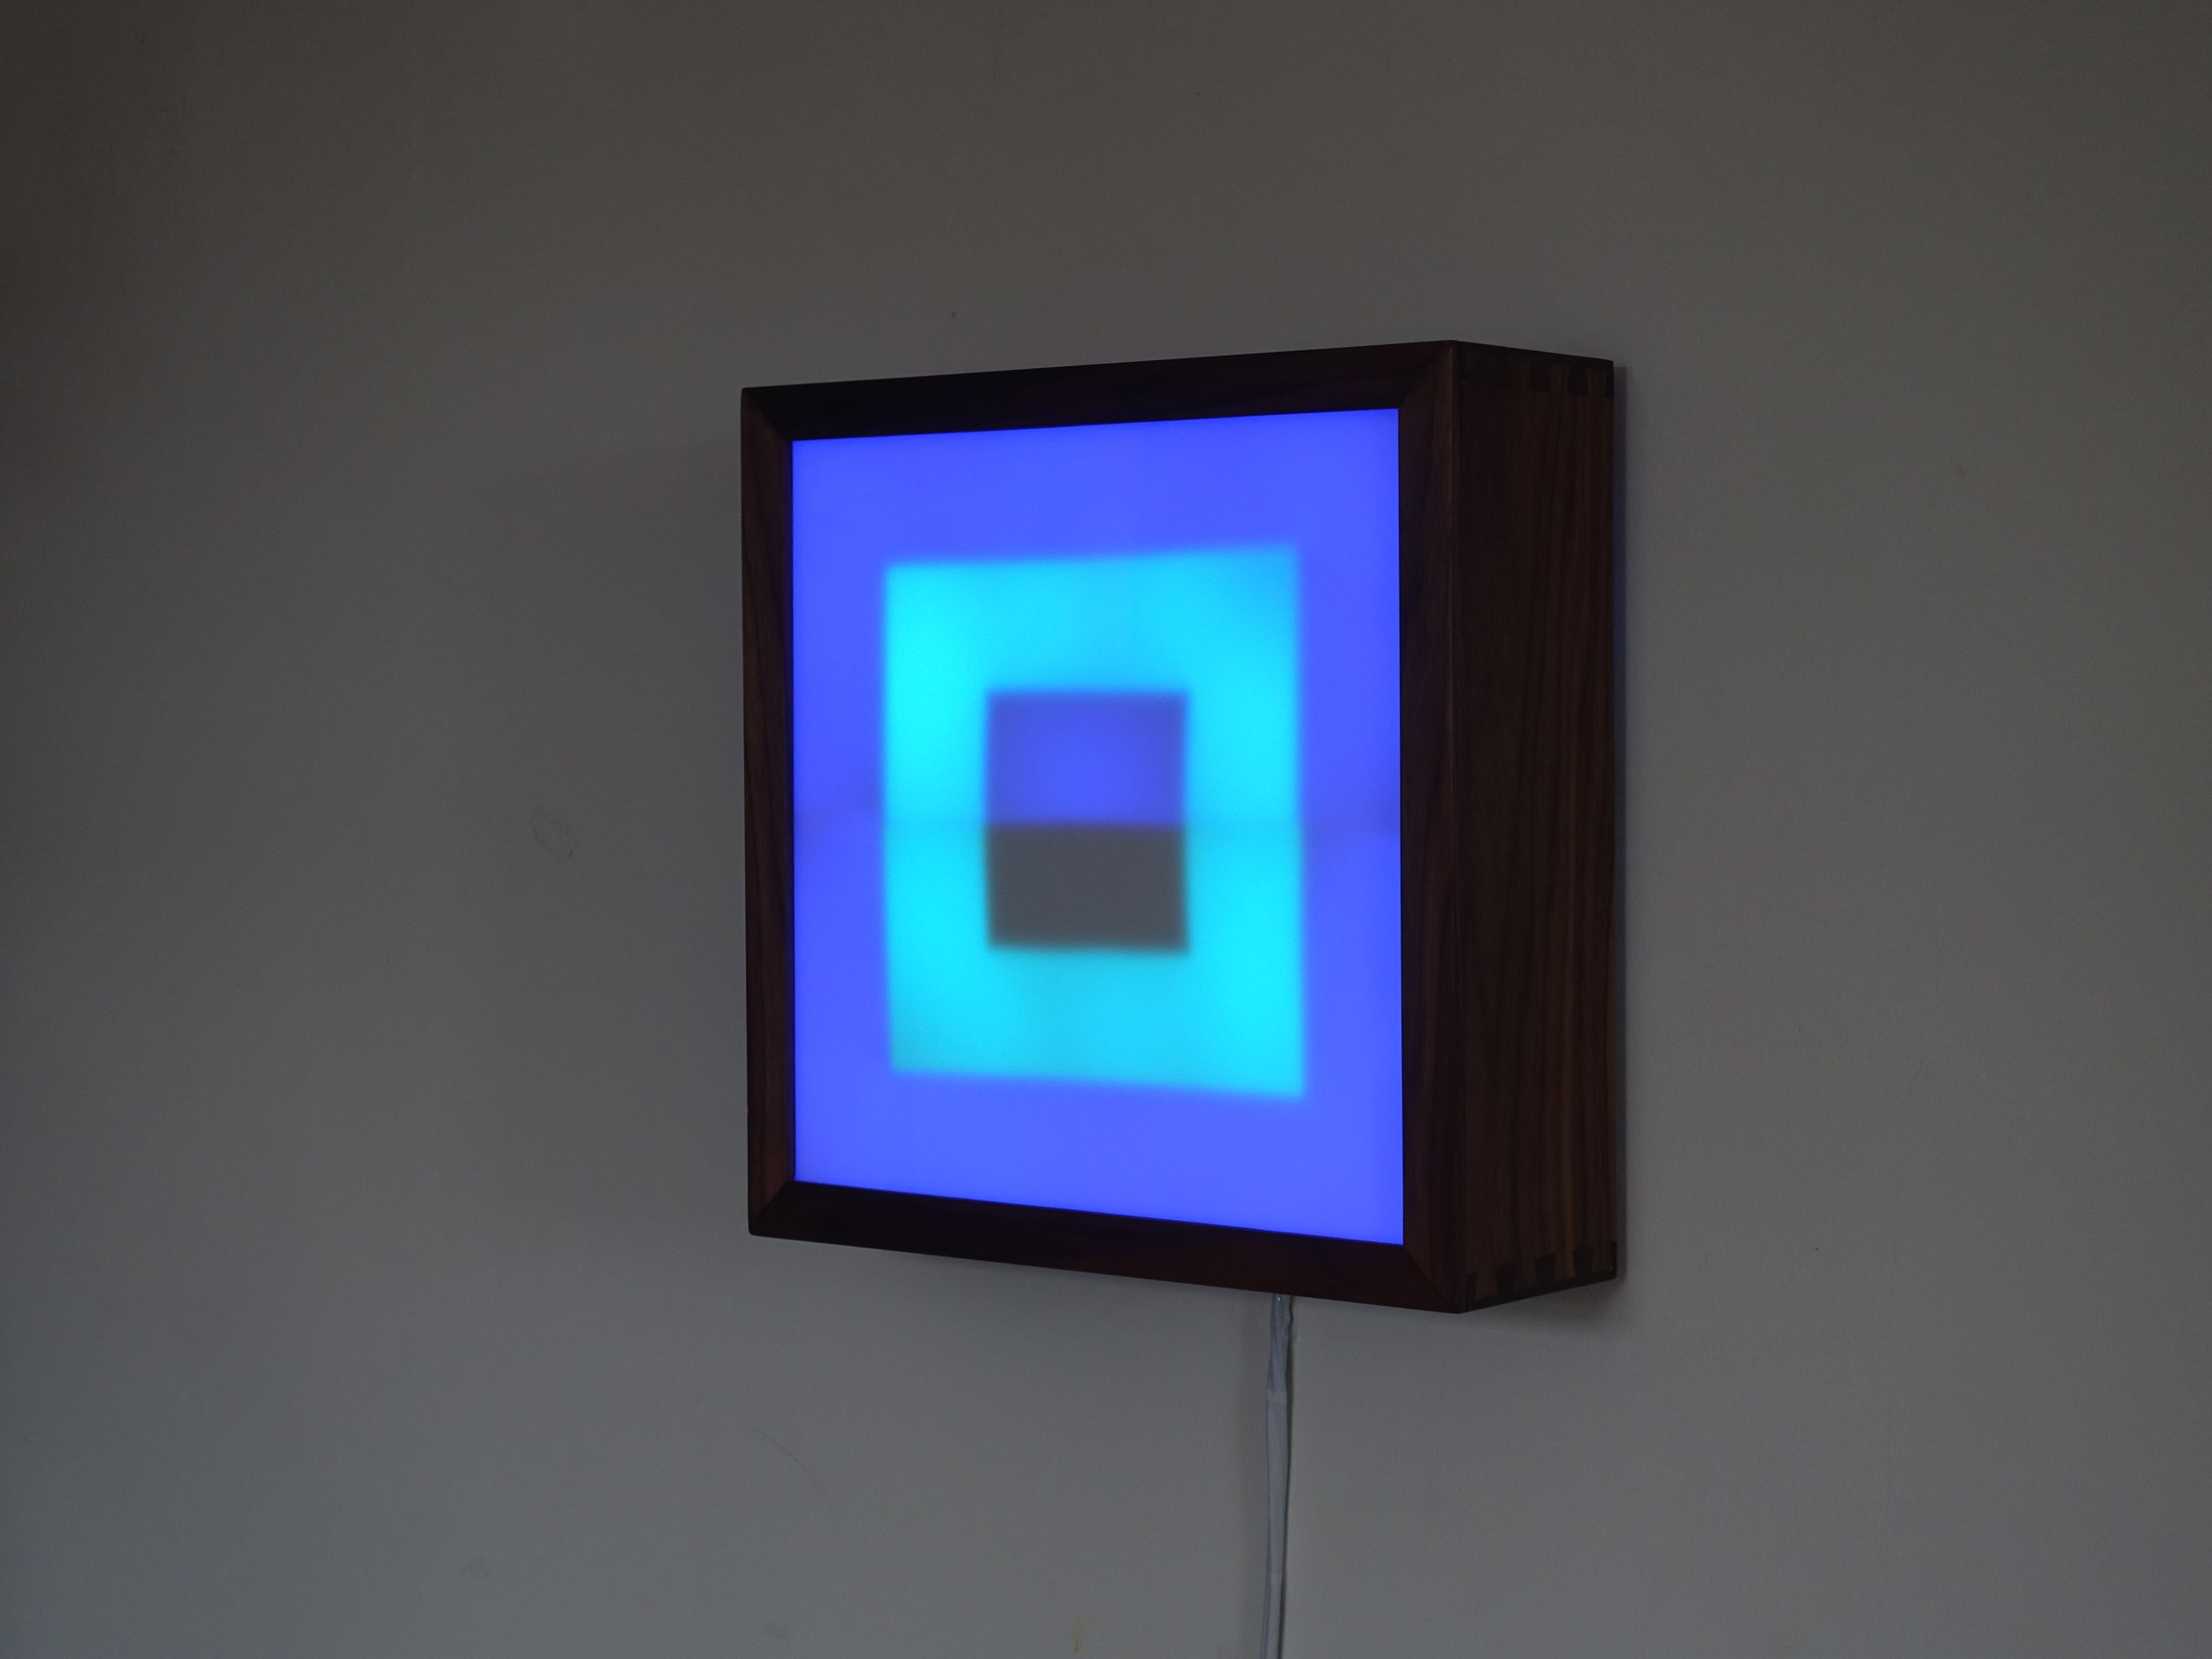 Copy of Square LED Lightbox prototype 4 of 5